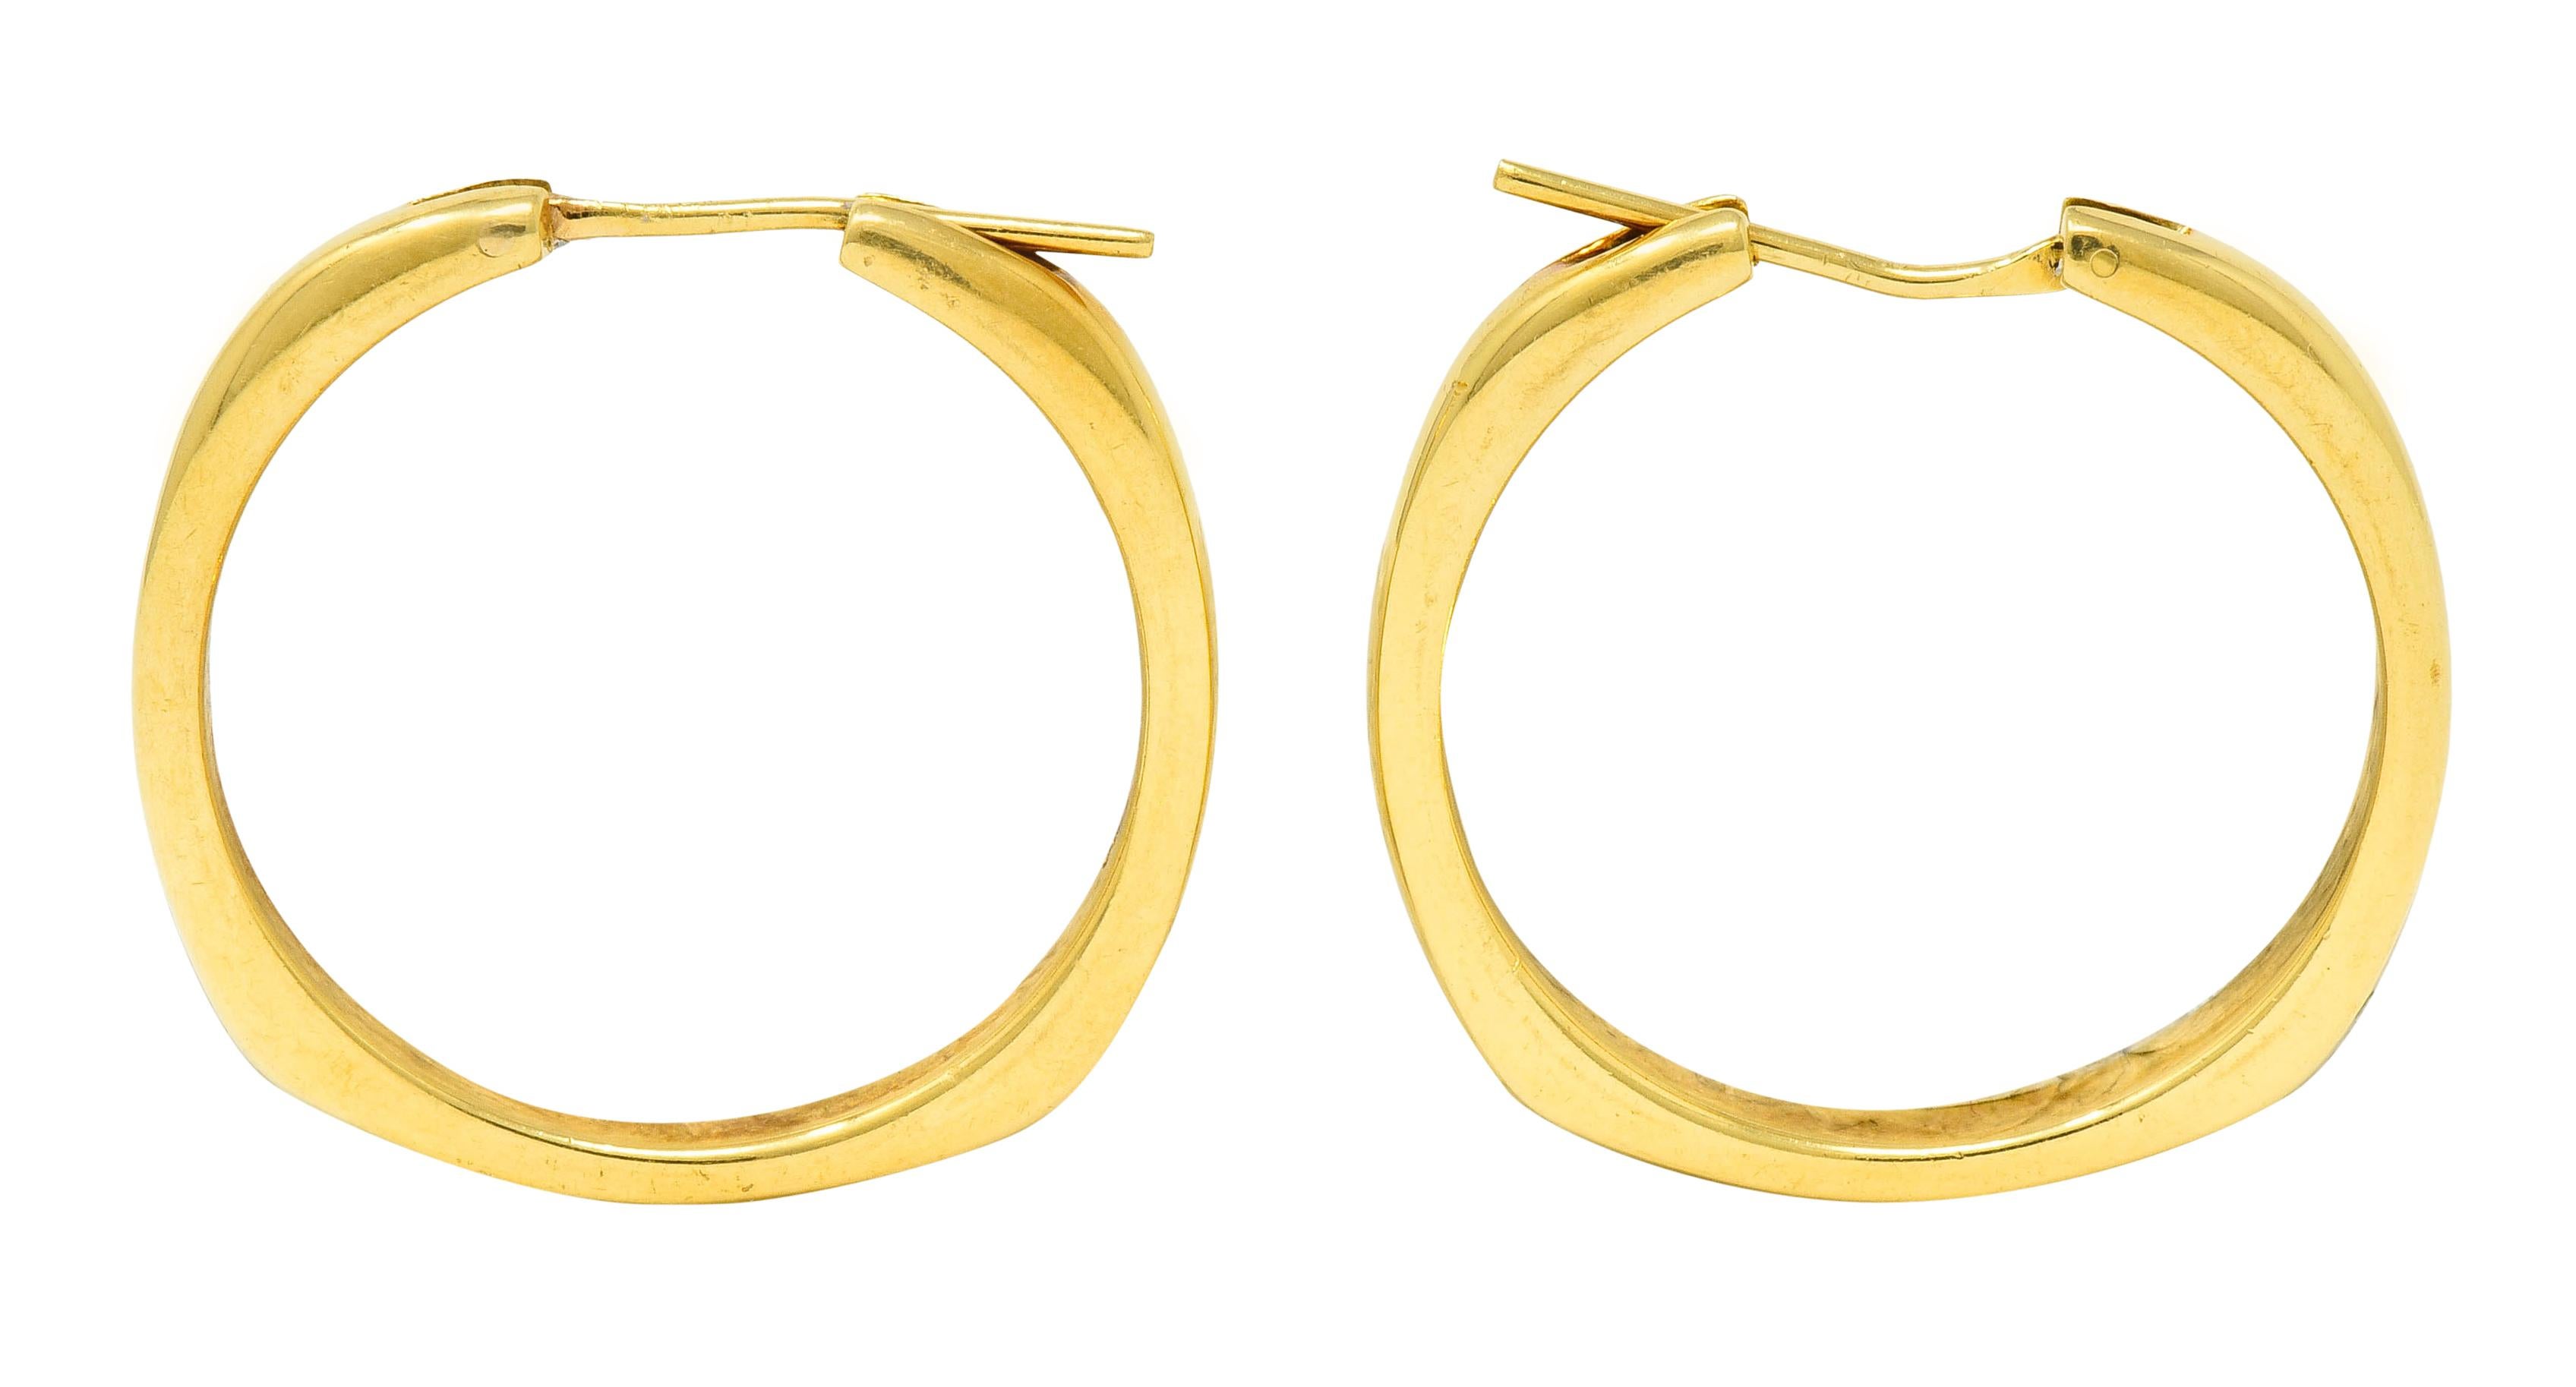 Hoop style earrings designed as a stylized square cushion shape with softly rounded corners

Features a bright finish

Completed by hinged posts

Fully signed Tiffany & Co.

Stamped 750 for 18 karat gold

From the Square Cushion collection, circa